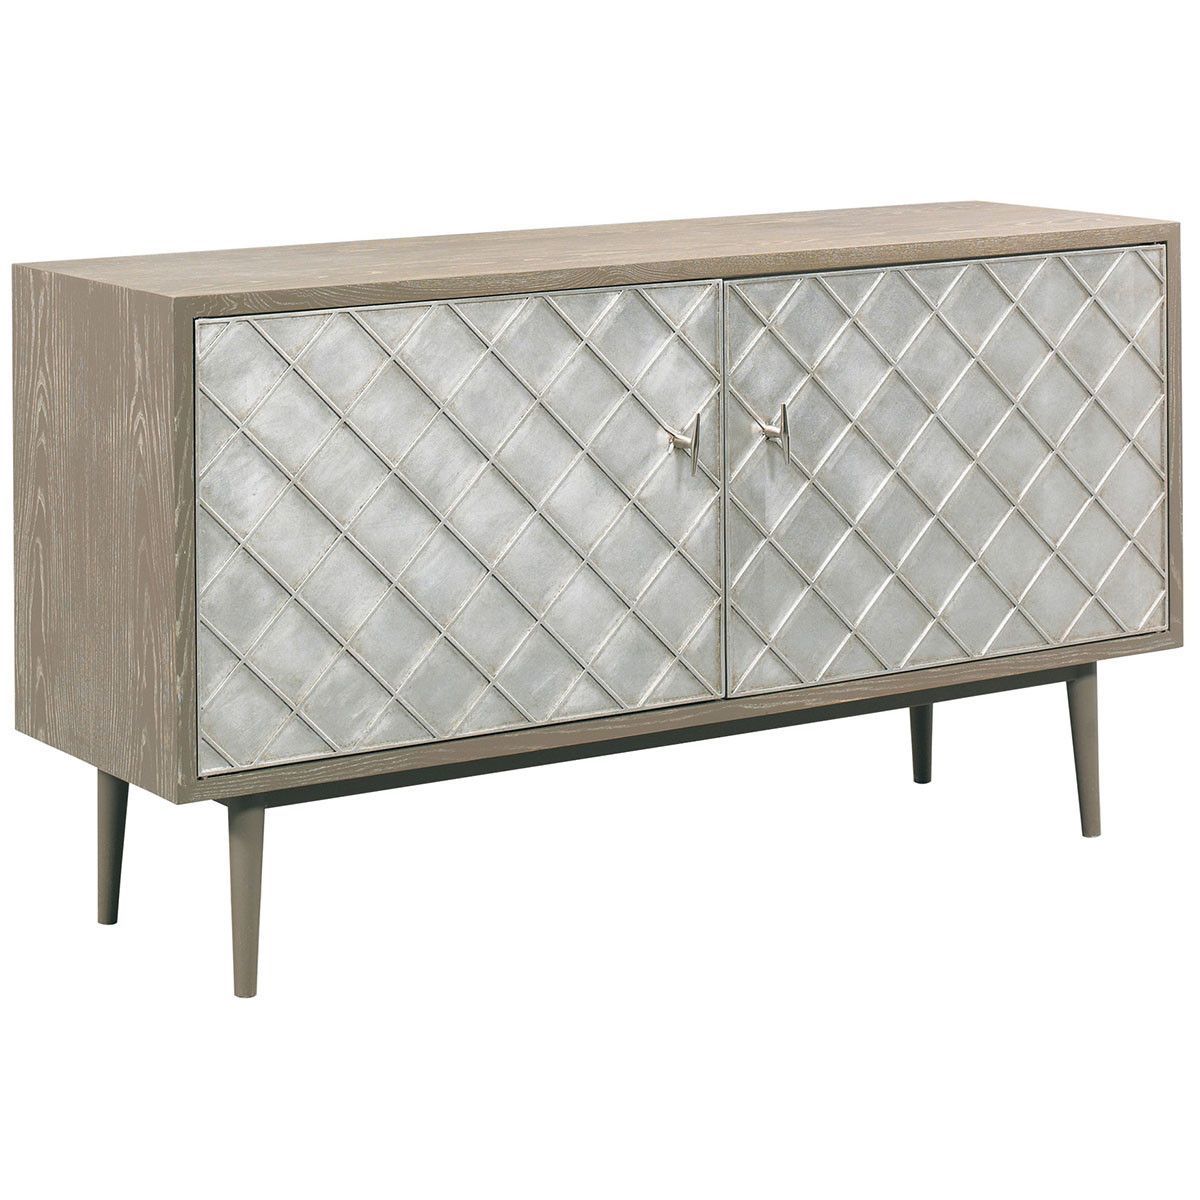 Cth Sherrill Occasional Vintage Made Modern Franco Media Cabinet Throughout Parsons Travertine Top & Dark Steel Base 48x16 Console Tables (View 9 of 30)